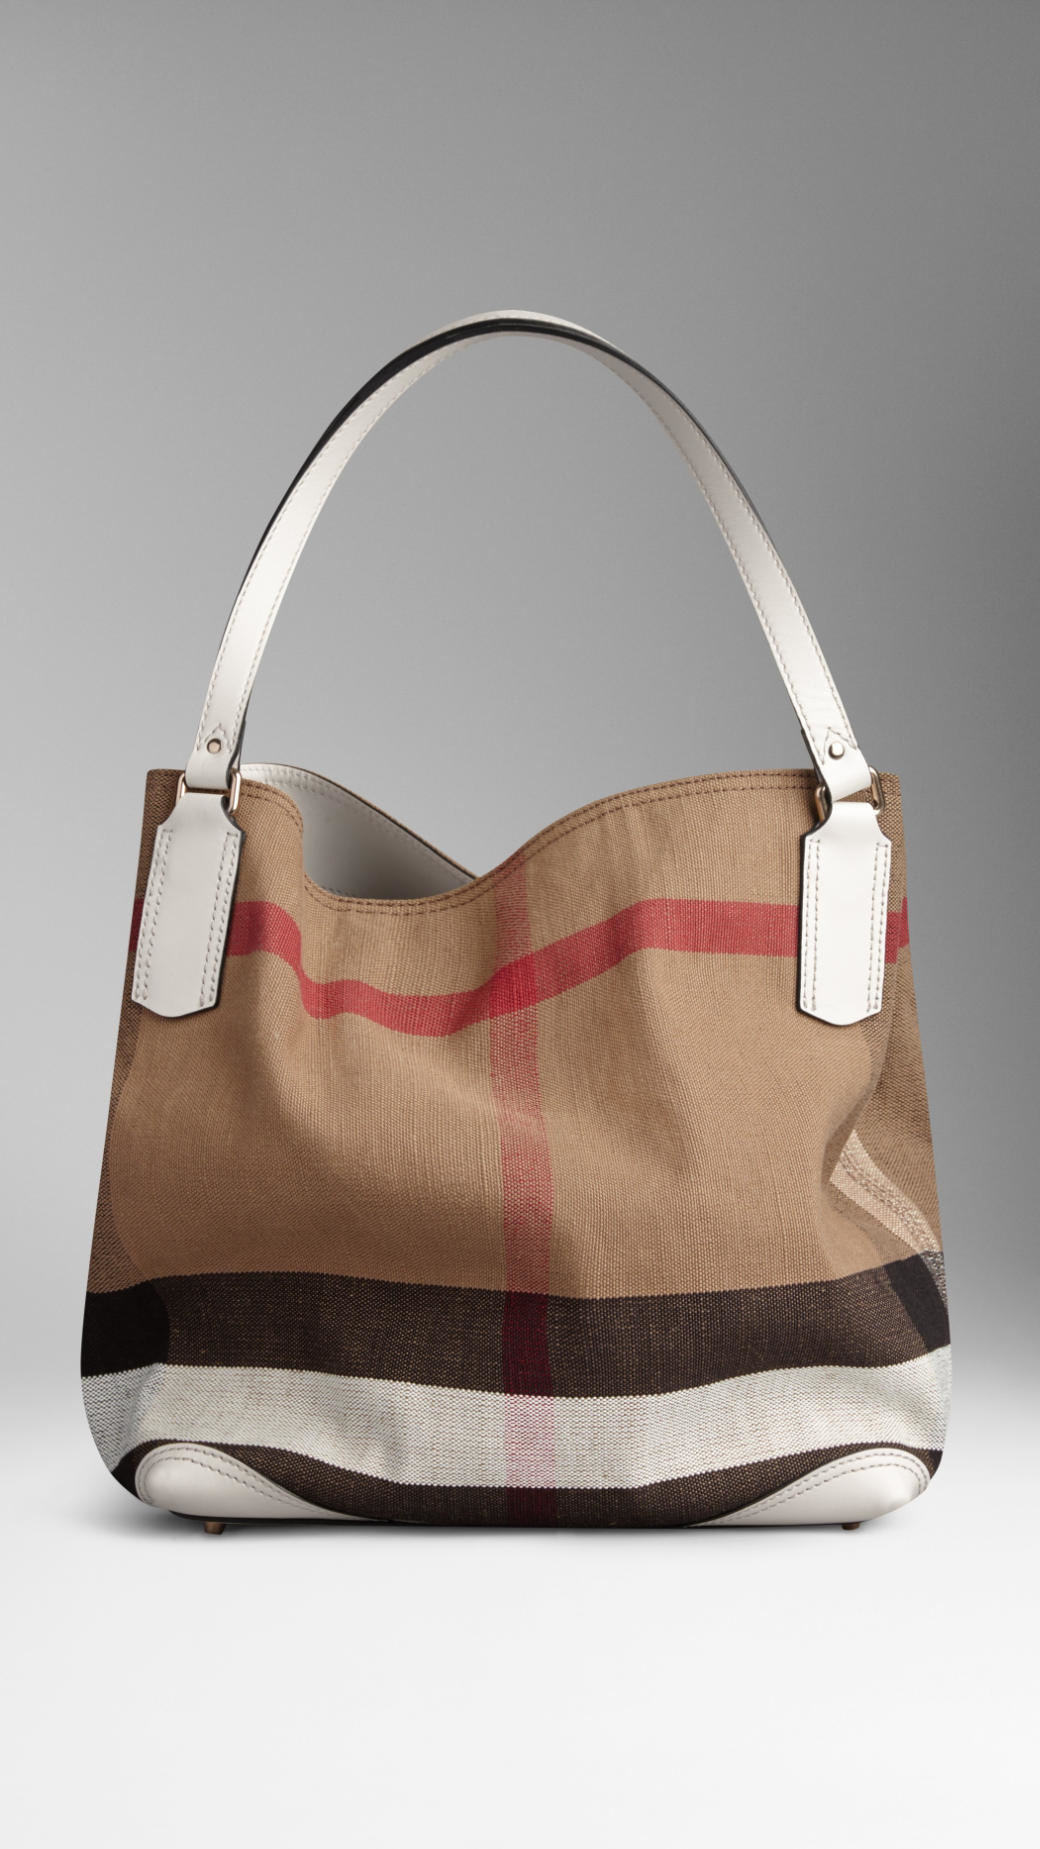 Lyst - Burberry Medium Canvas Check Tote Bag in White